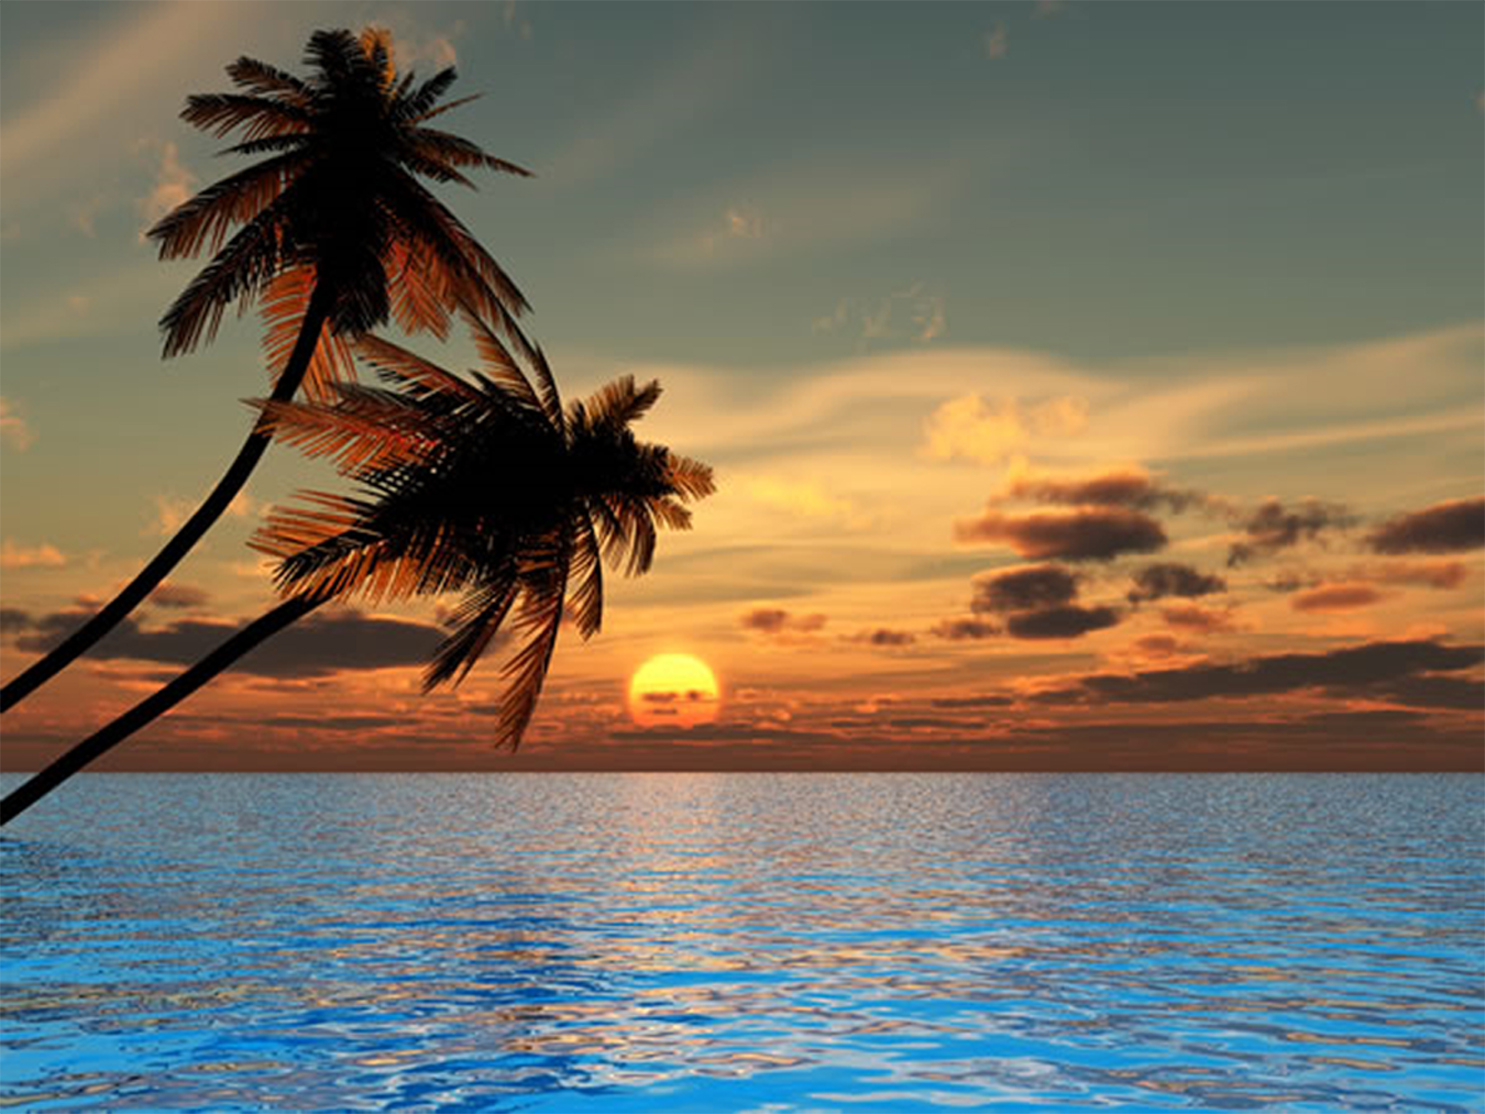 Desktop I Will Updating The With Other Wallpaper Of Sunset Beach